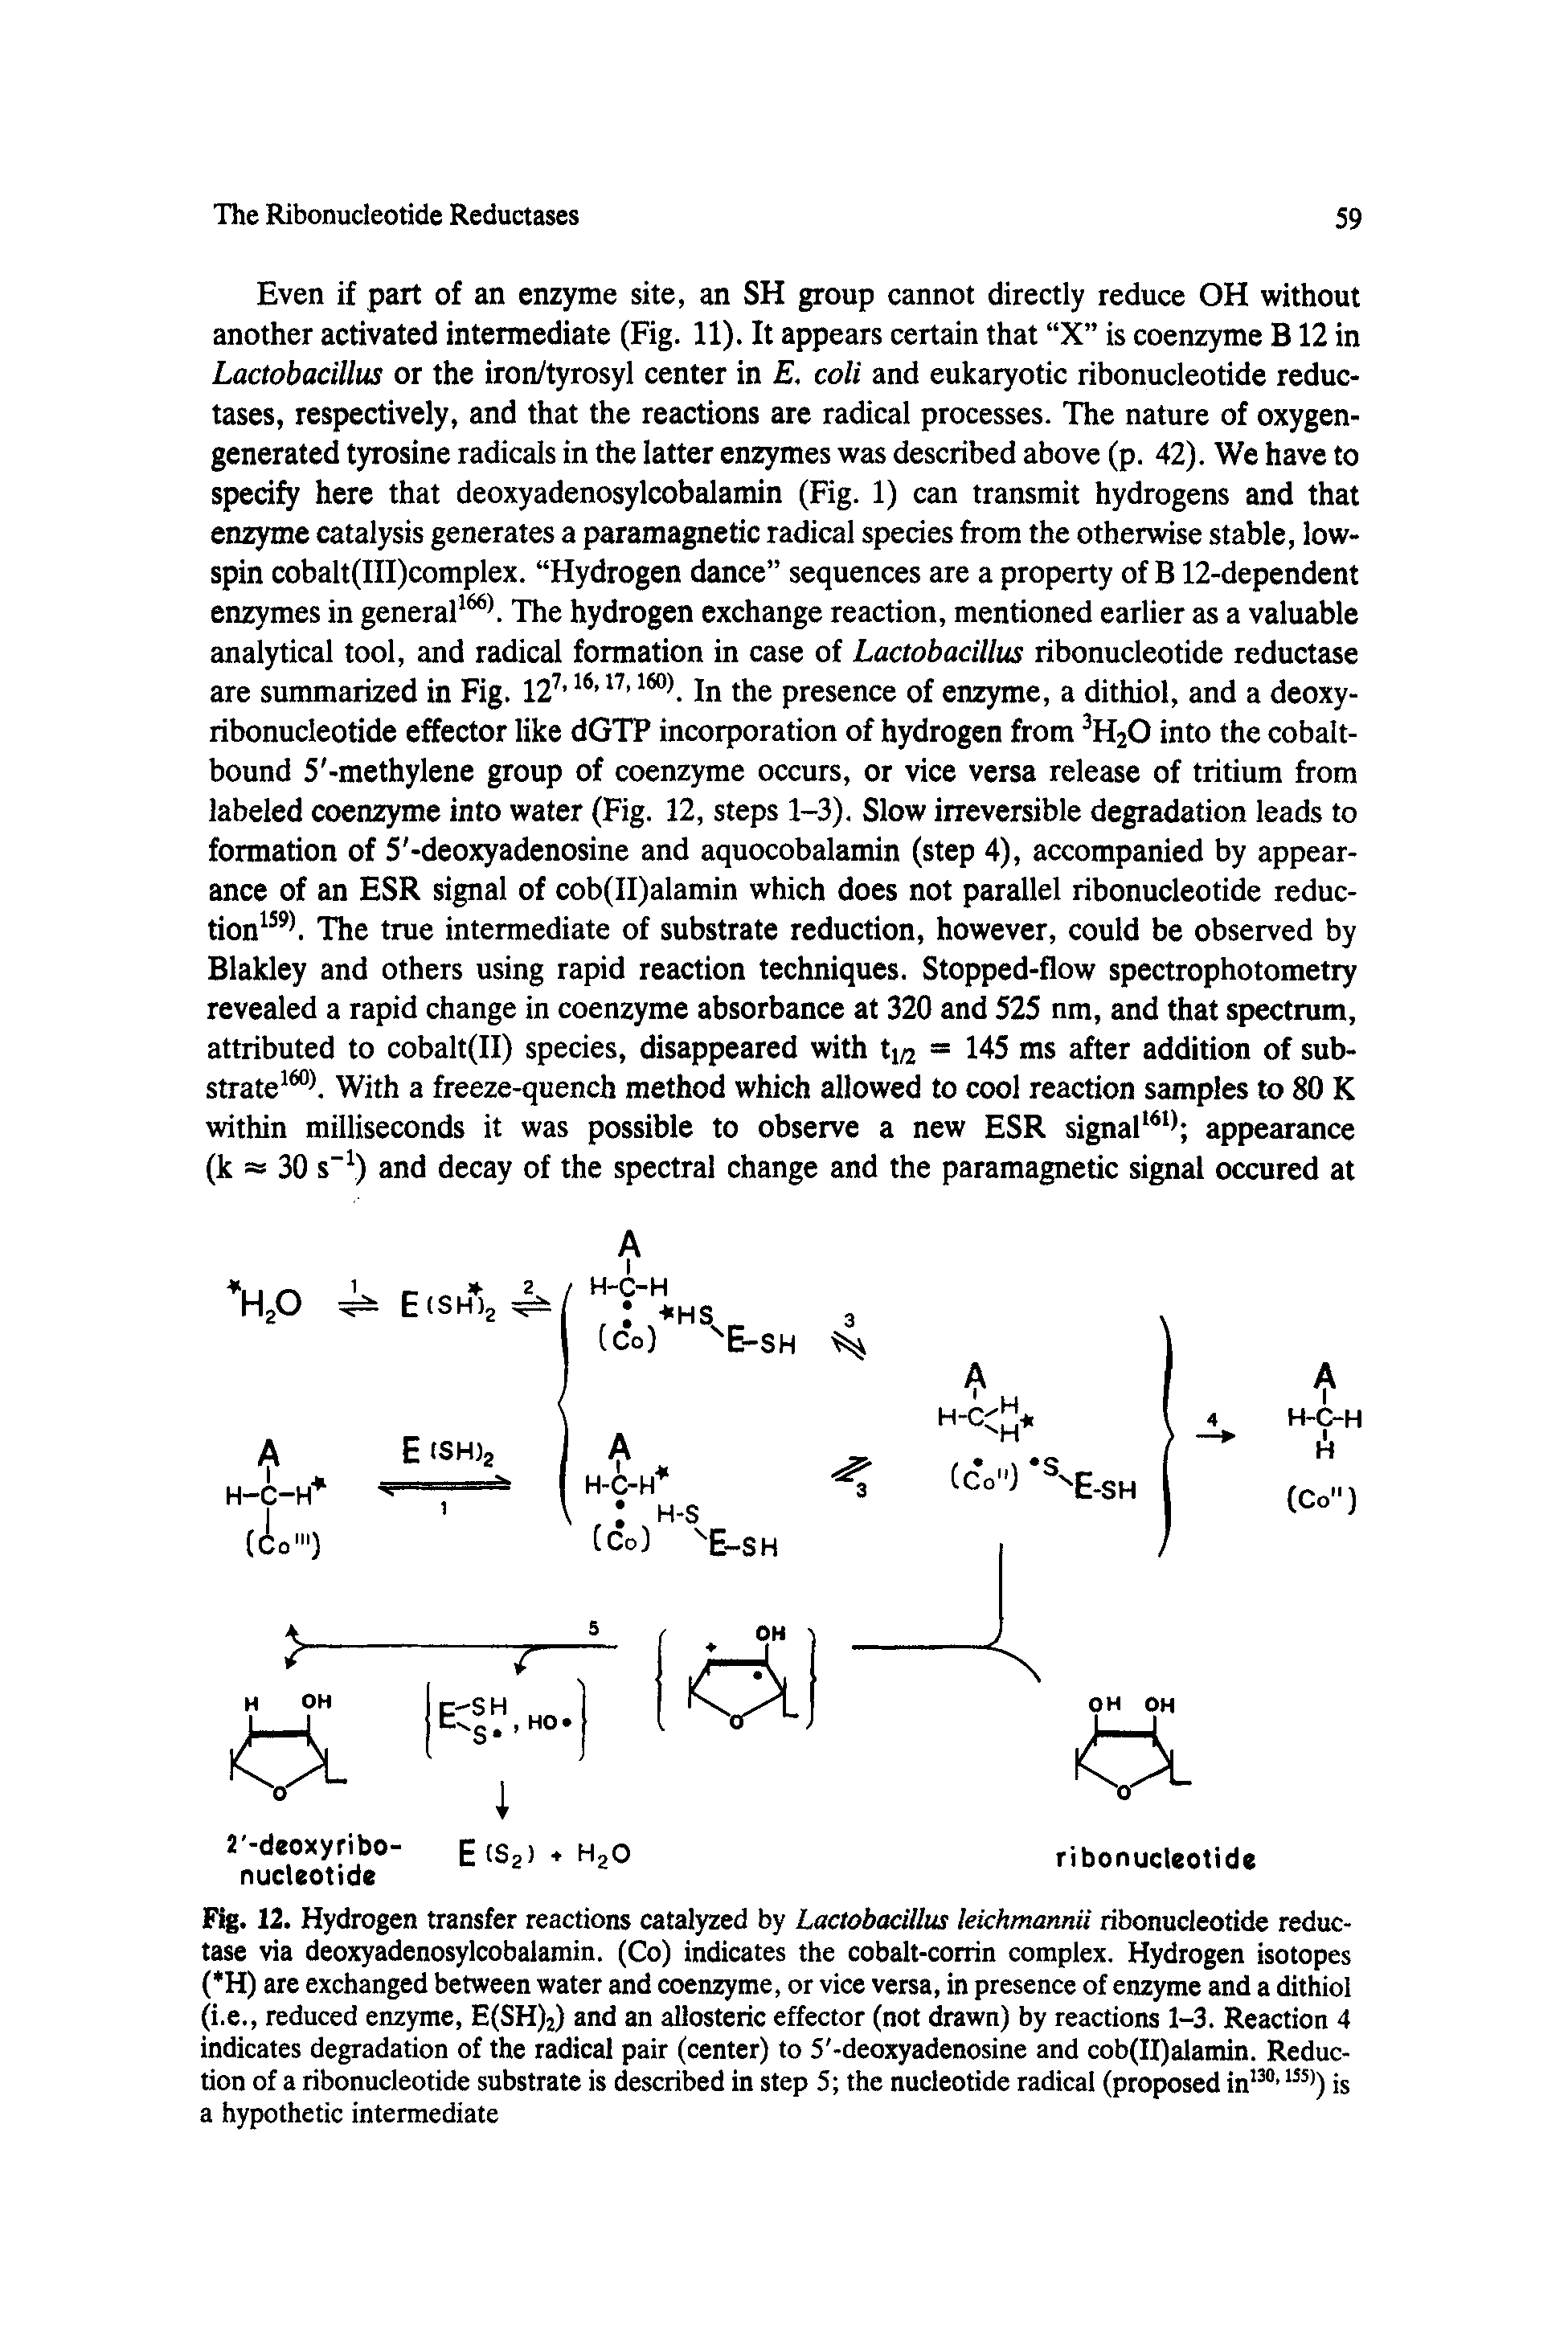 Fig. 12. Hydrogen transfer reactions catalyzed by Lactobacillus lekhmannii ribonucleotide reductase via deoxyadenosylcobalamin. (Co) indicates the cobalt-corrin complex. Hydrogen isotopes ( H) are exchanged between water and coenzyme, or vice versa, in presence of enzyme and a dithiol (i.e., reduced enzyme, E(SH)2) and an allosteric effector (not drawn) by reactions 1-3. Reaction 4 indicates degradation of the radical pair (center) to 5 -deoxyadenosine and cob(II)alamin. Reduction of a ribonucleotide substrate is described in step 5 the nucleotide radical (proposed in >) is a hypothetic intermediate...